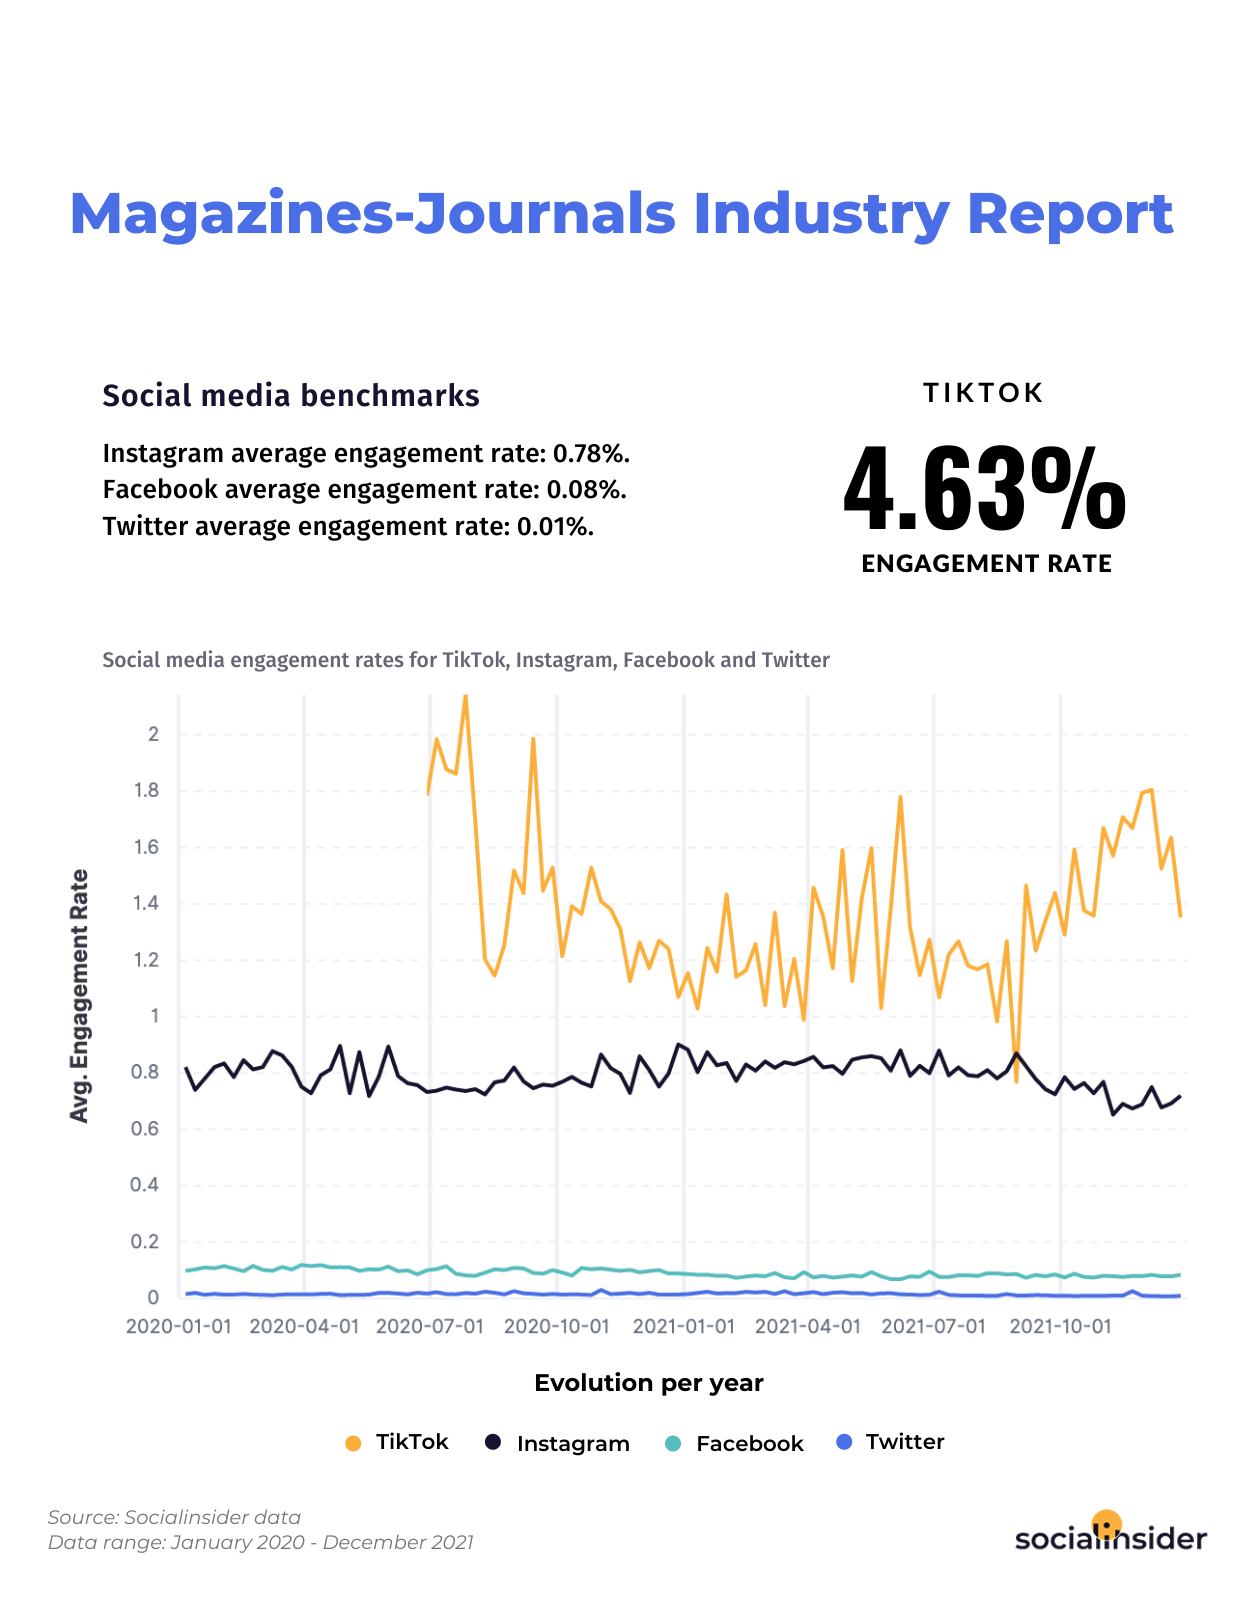 Engagement rate stats for magazines and journals for 2022